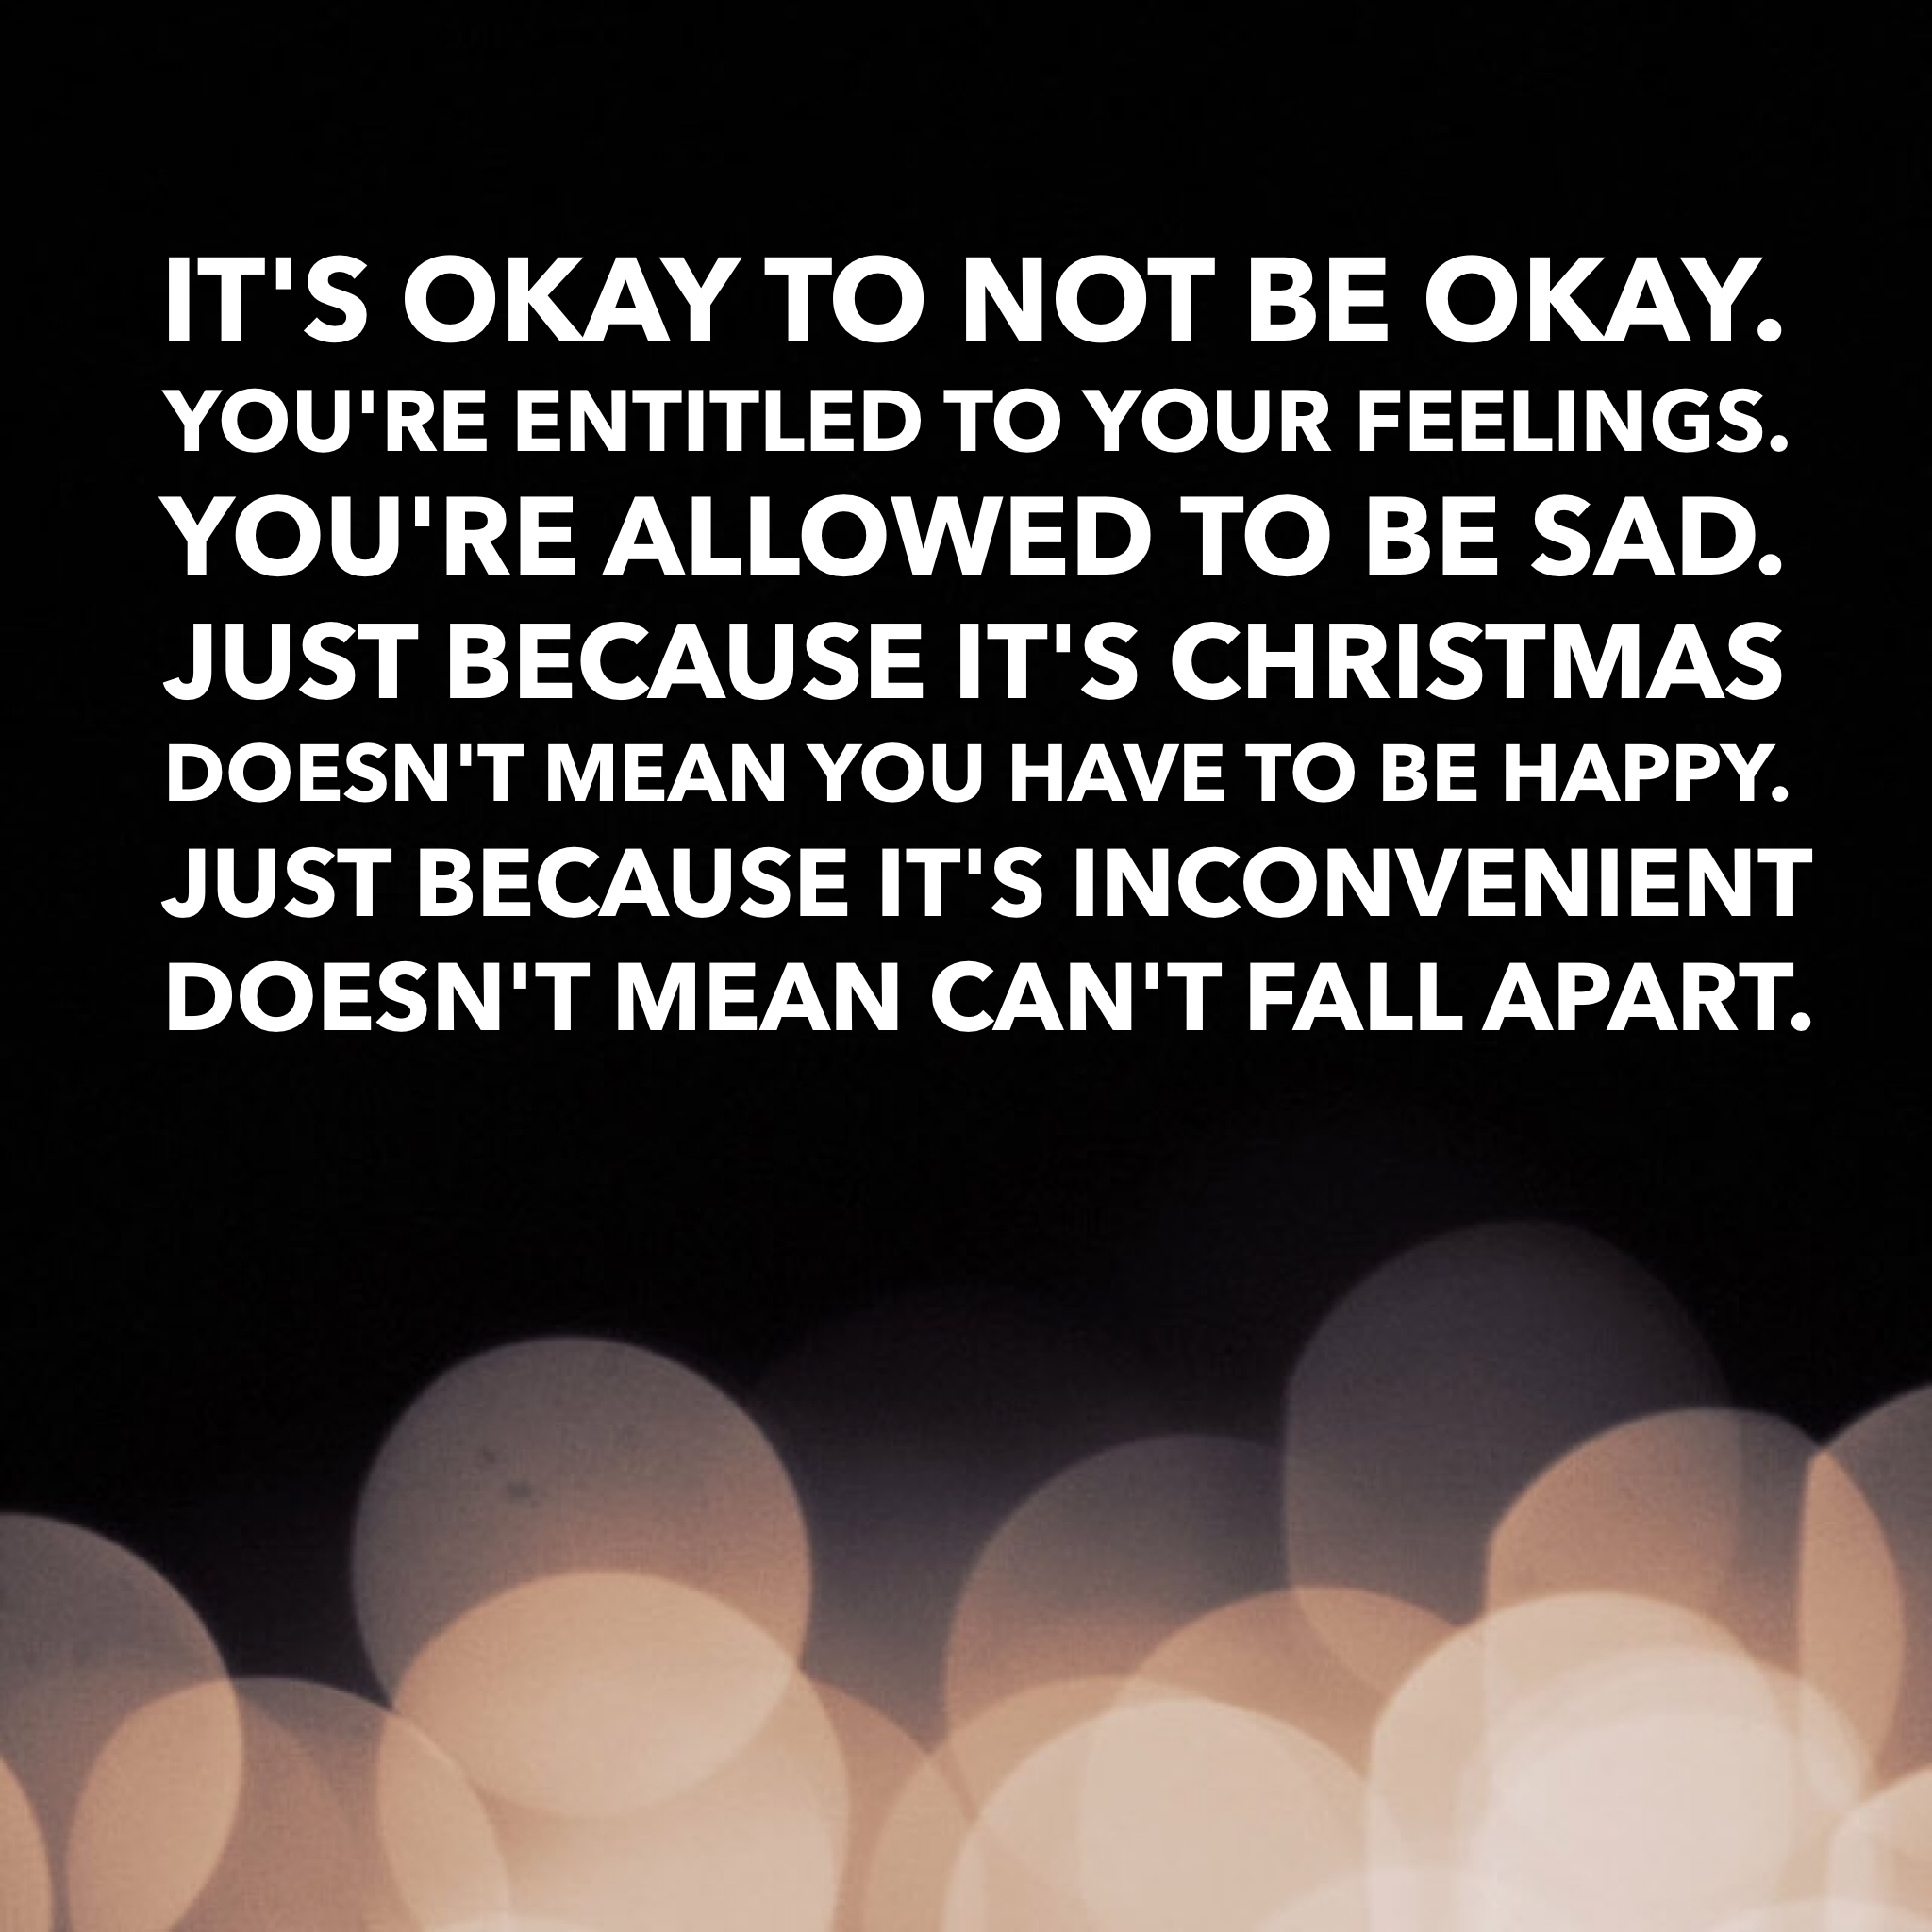 Just because it's Christmas does not mean you have to be happy.